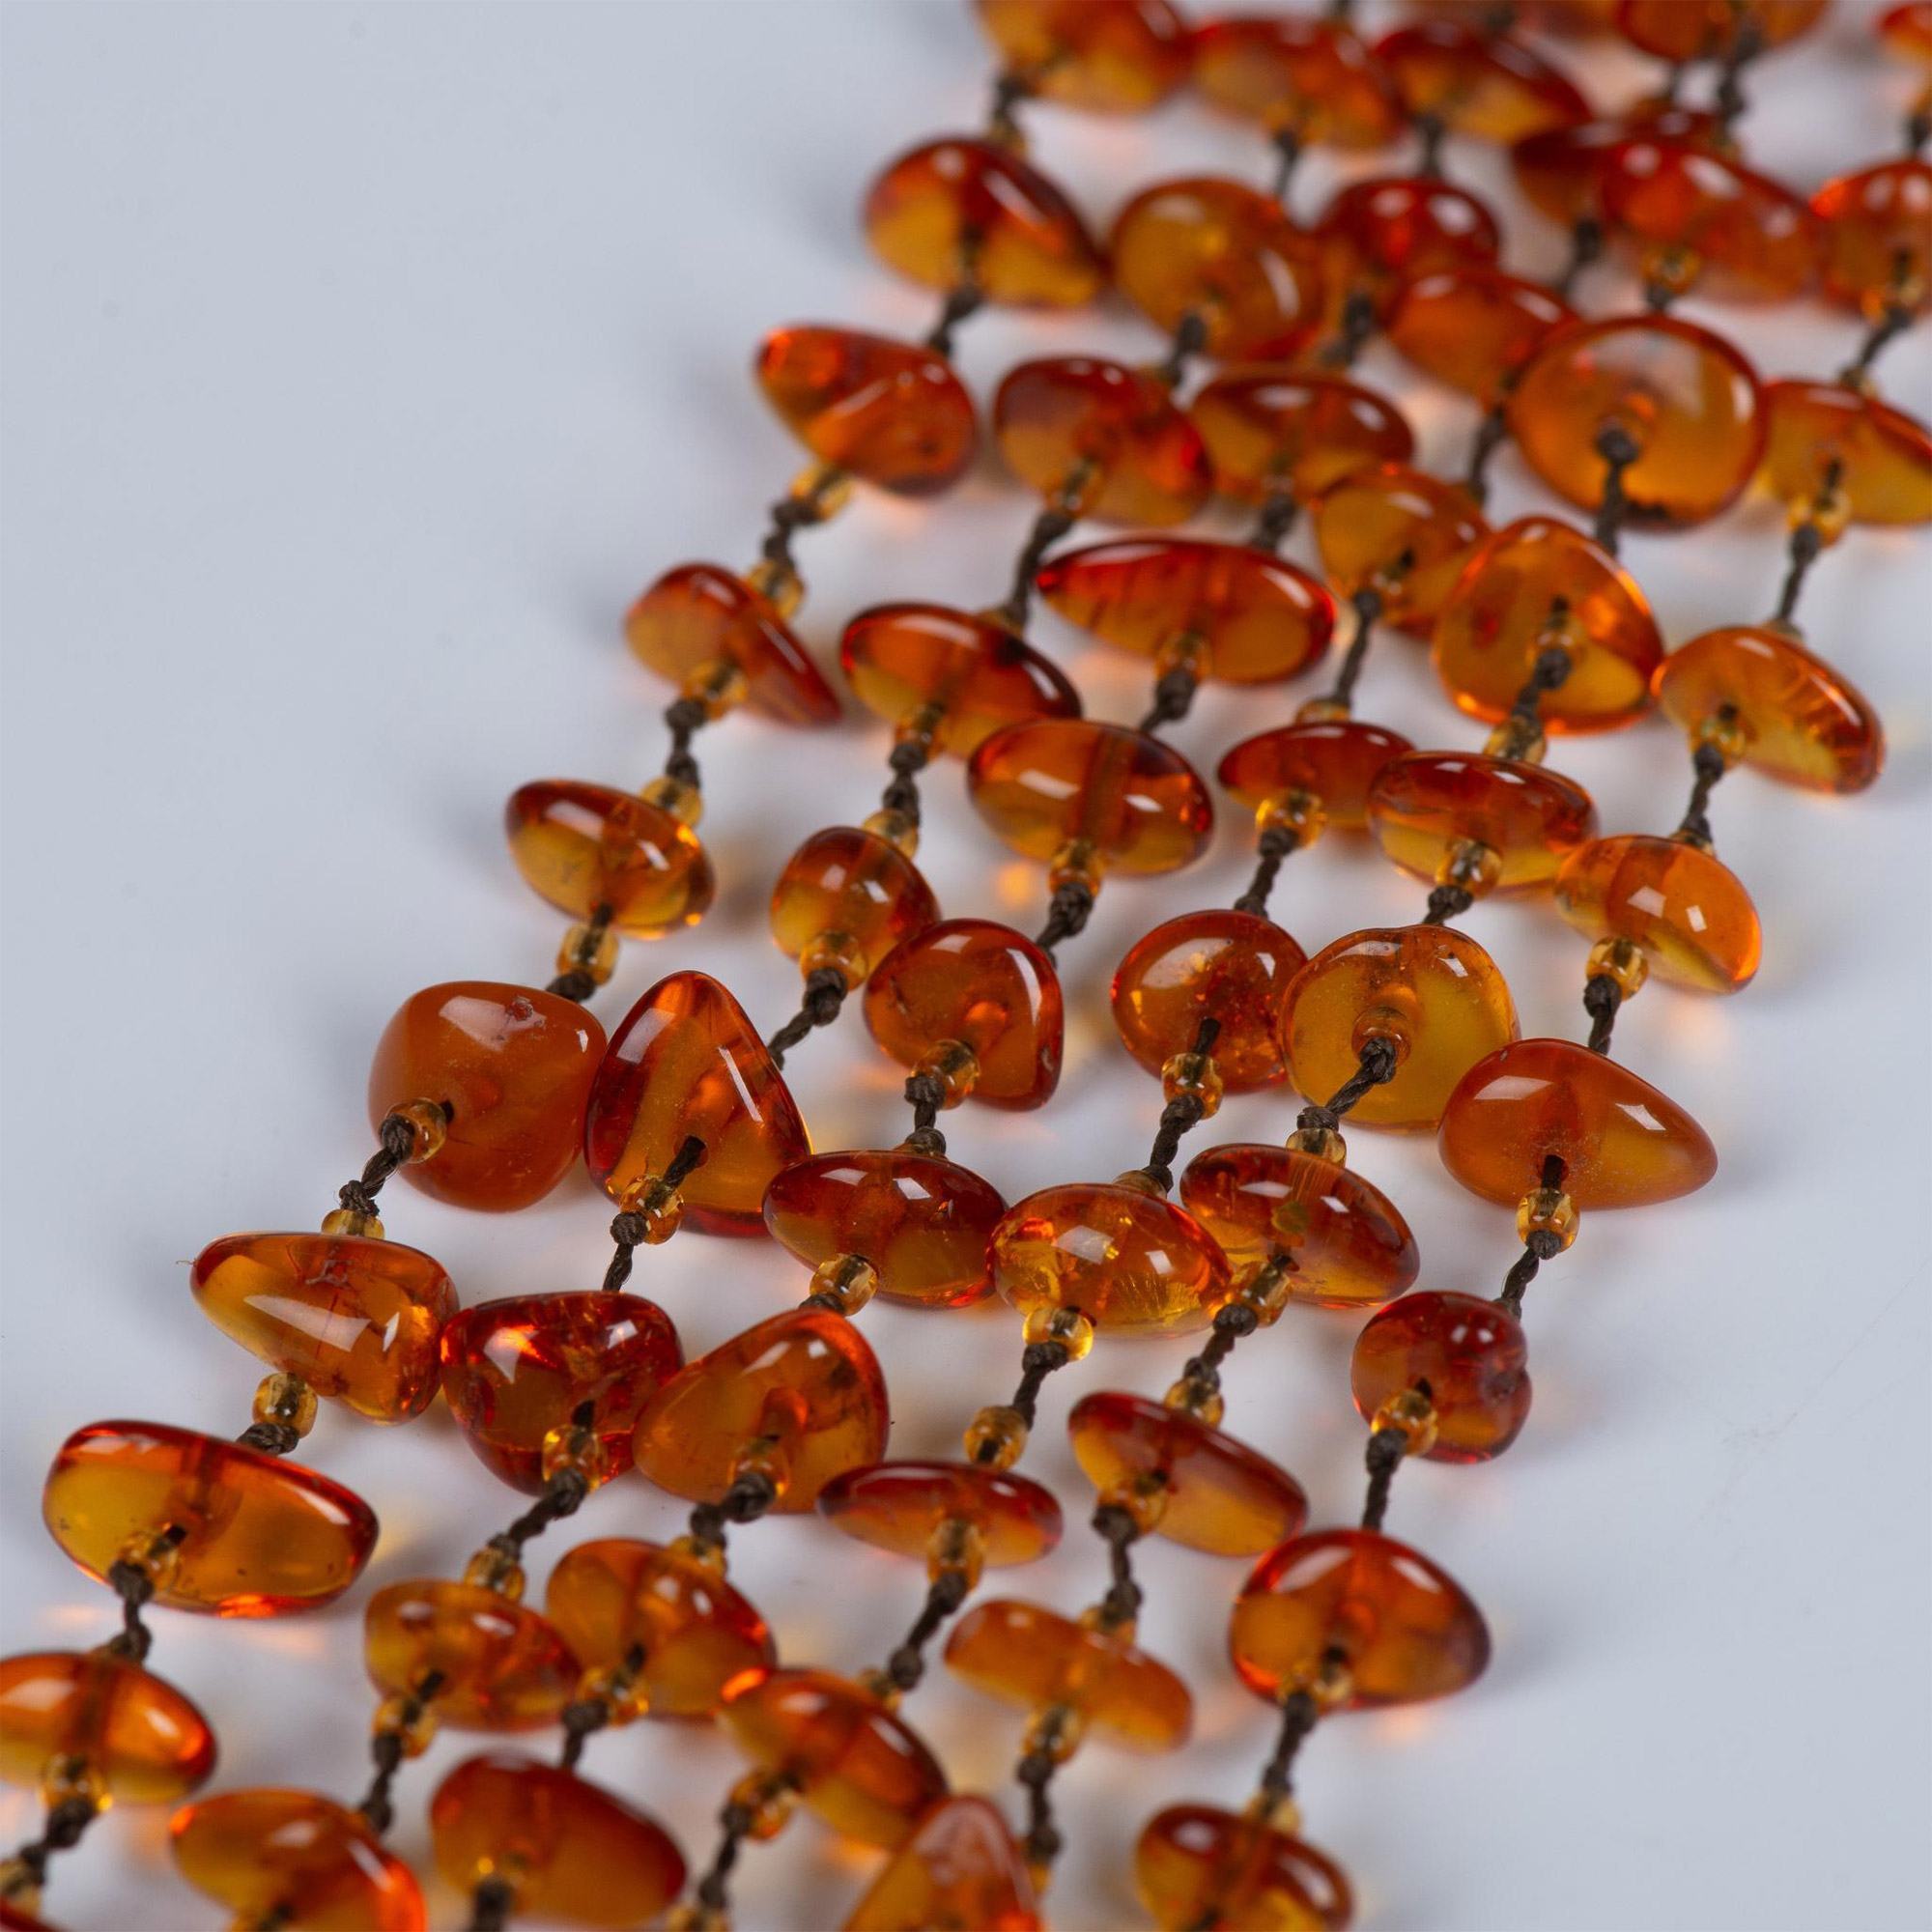 Russian Amber 6 Strand Necklace with Solid Stone Pendant - Image 4 of 4